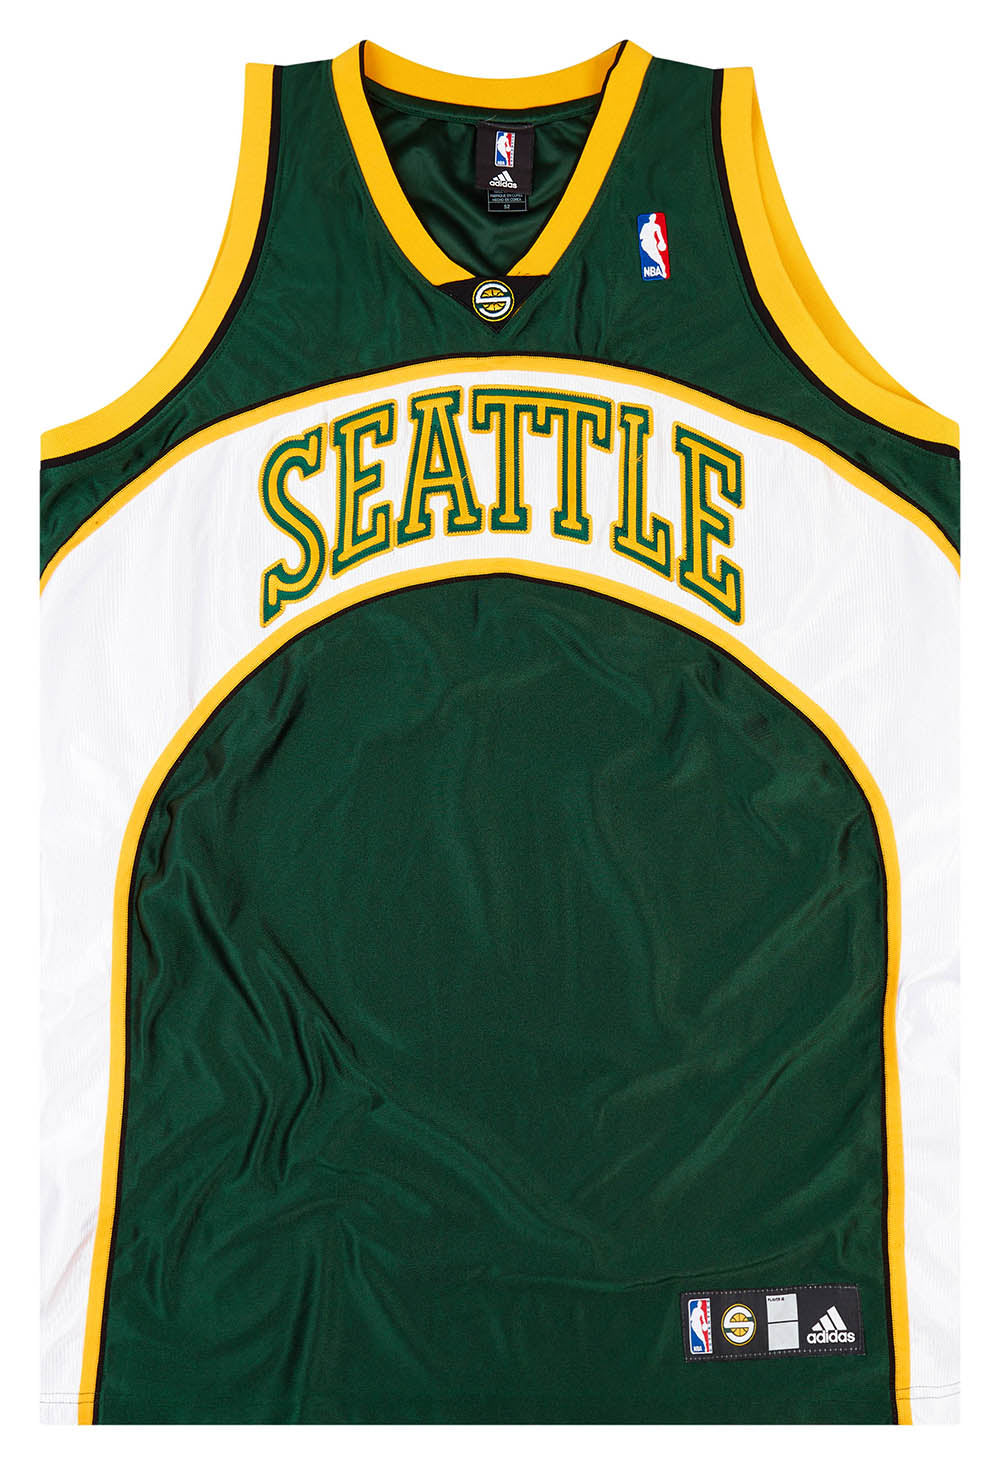 2006-08 AUTHENTIC SEATTLE SUPERSONICS ADIDAS JERSEY (AWAY) XXL